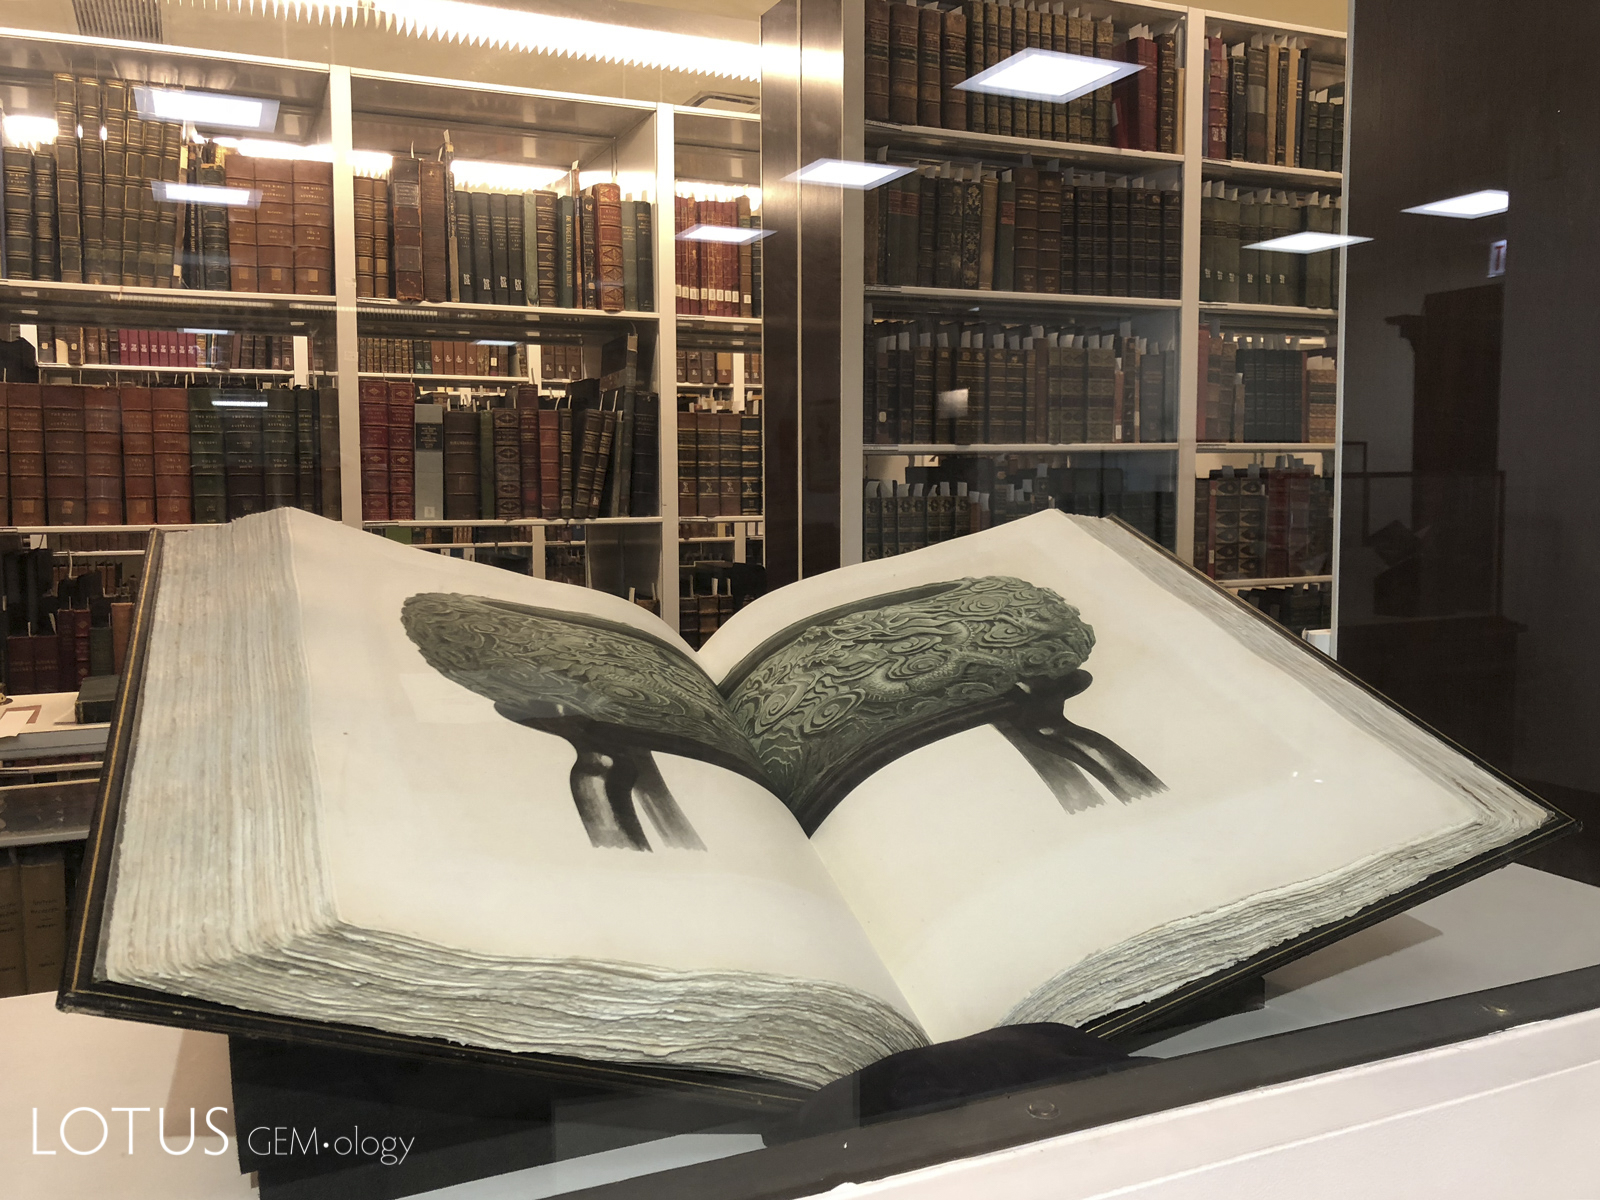 Two of the amazing lifelike plates from The Bishop Collection in the library of Chicago’s Field Museum